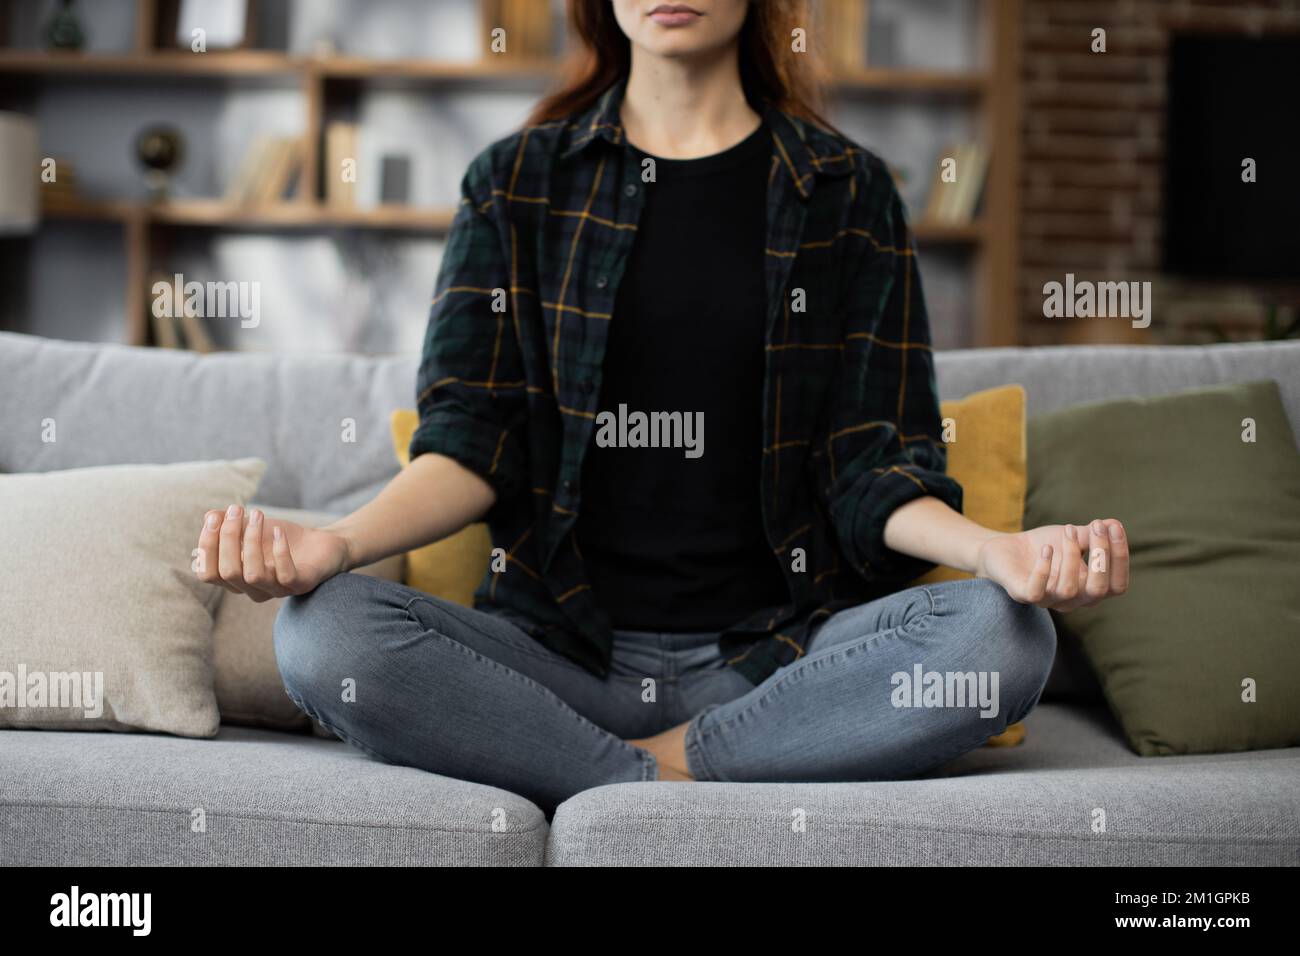 Cropped view Yong female sitting on couch in lotus pose put hands on lap folded fingers enjoy meditation do yoga exercise at home. No stress healthy habit mindfulness lifestyle anxiety relief concept Stock Photo